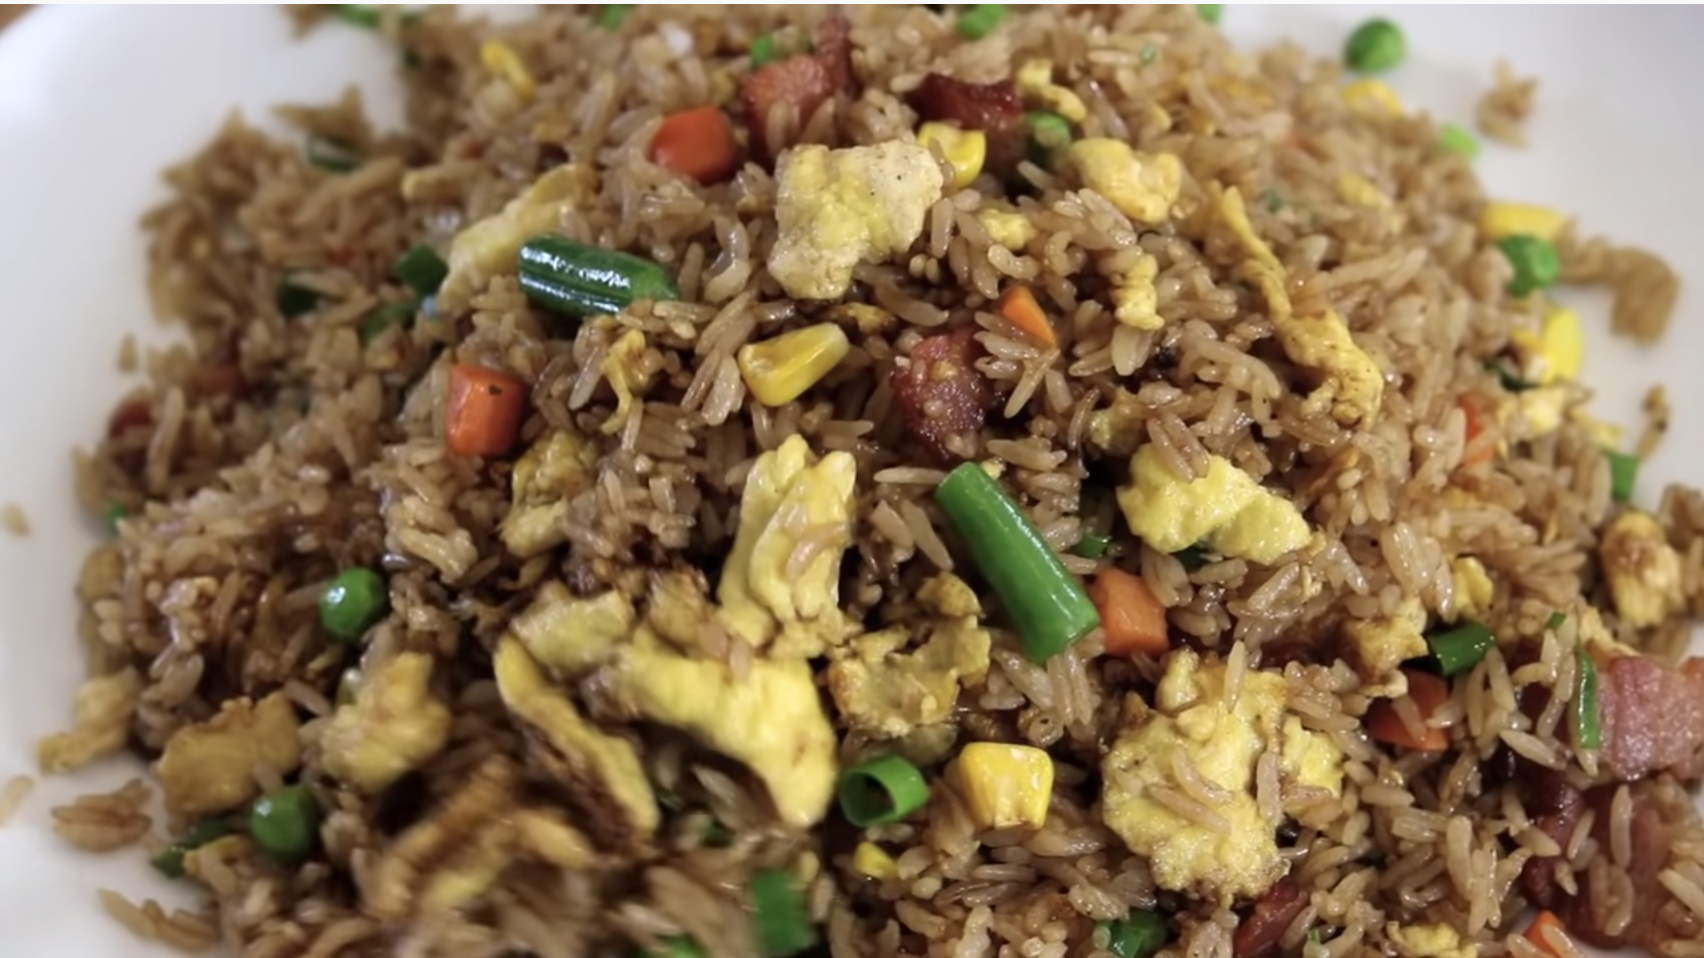 Fried rice with egg and veggies